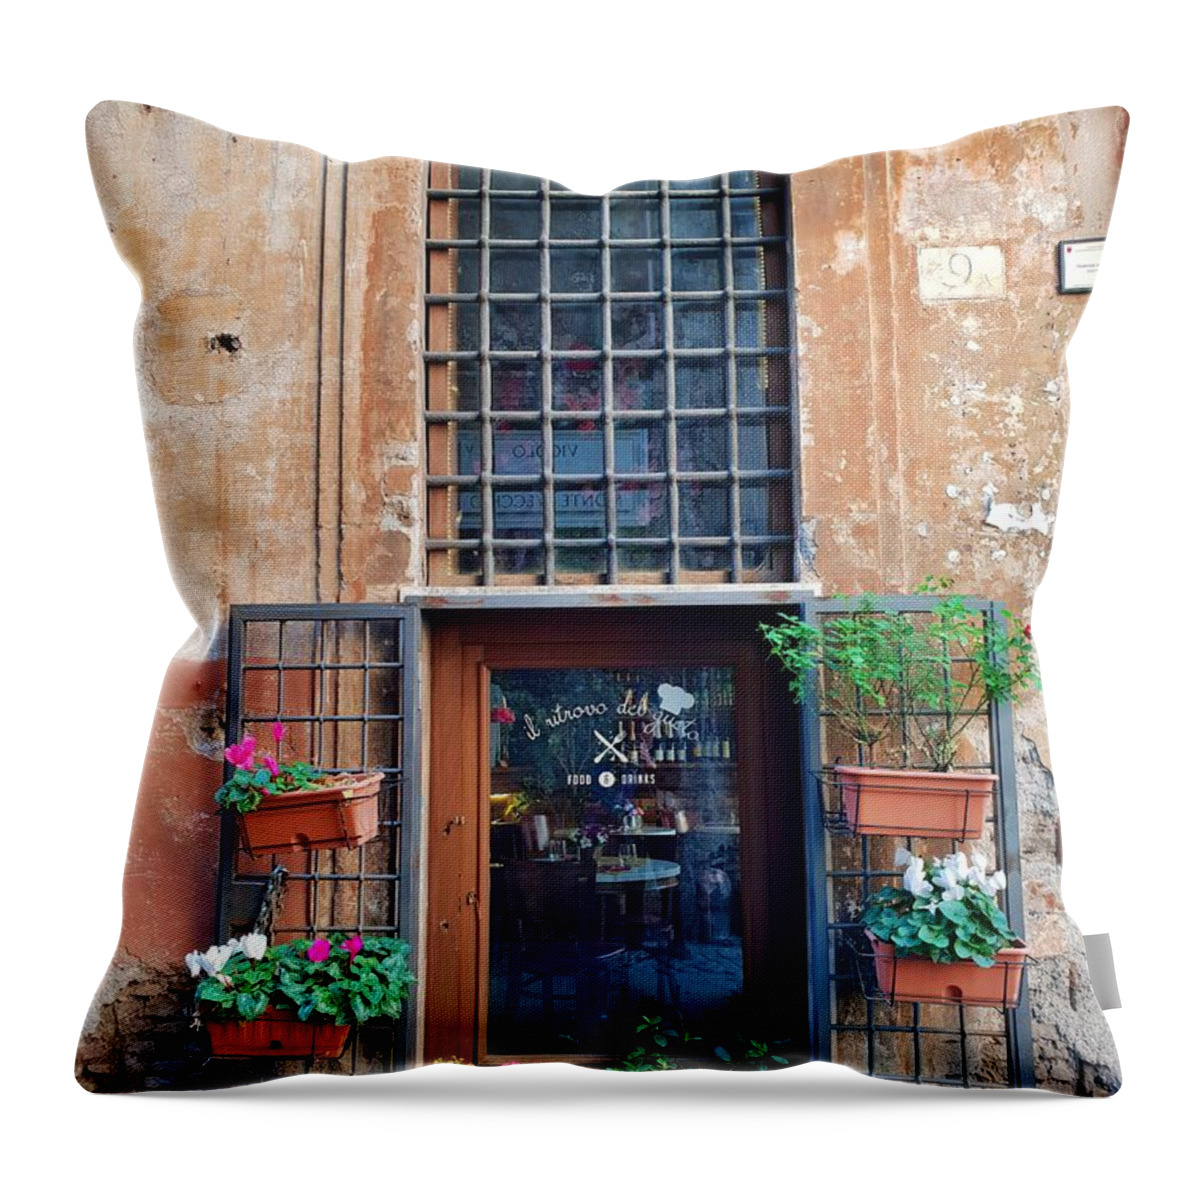 Architecture Throw Pillow featuring the photograph The Roman Window by Andrea Whitaker